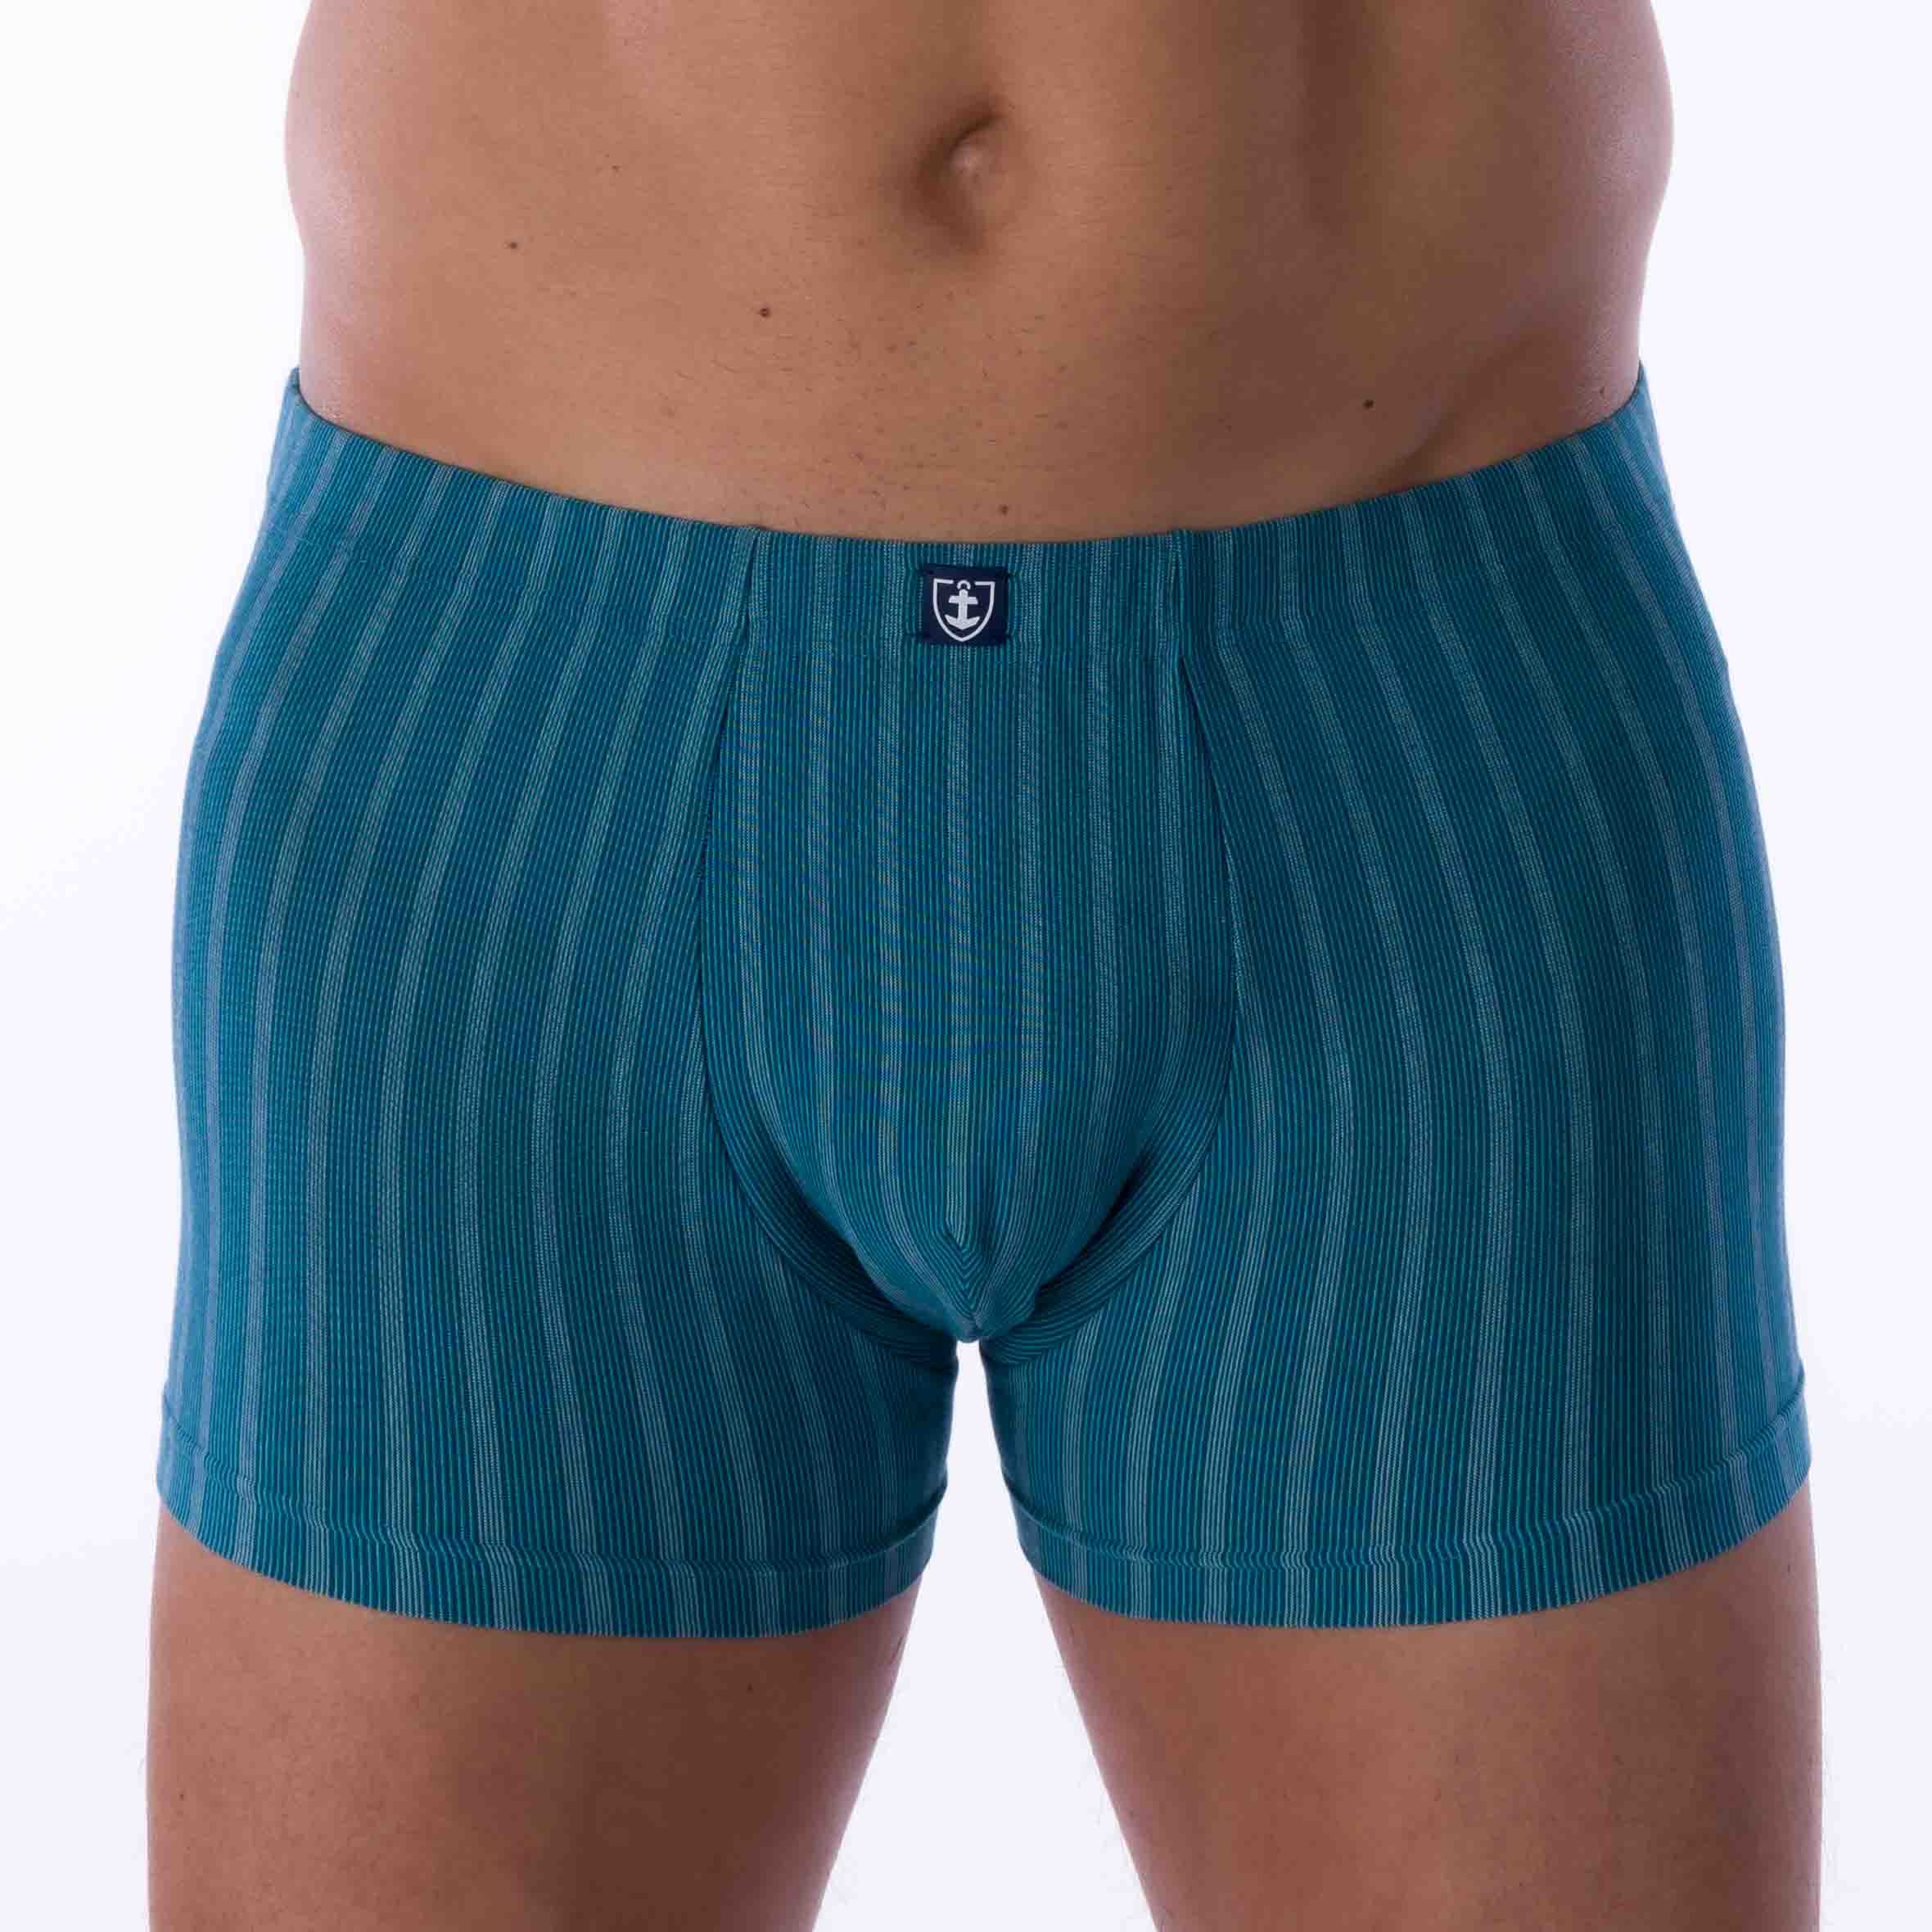 Belted Shorty in Petrol Blue Striped Lyocell